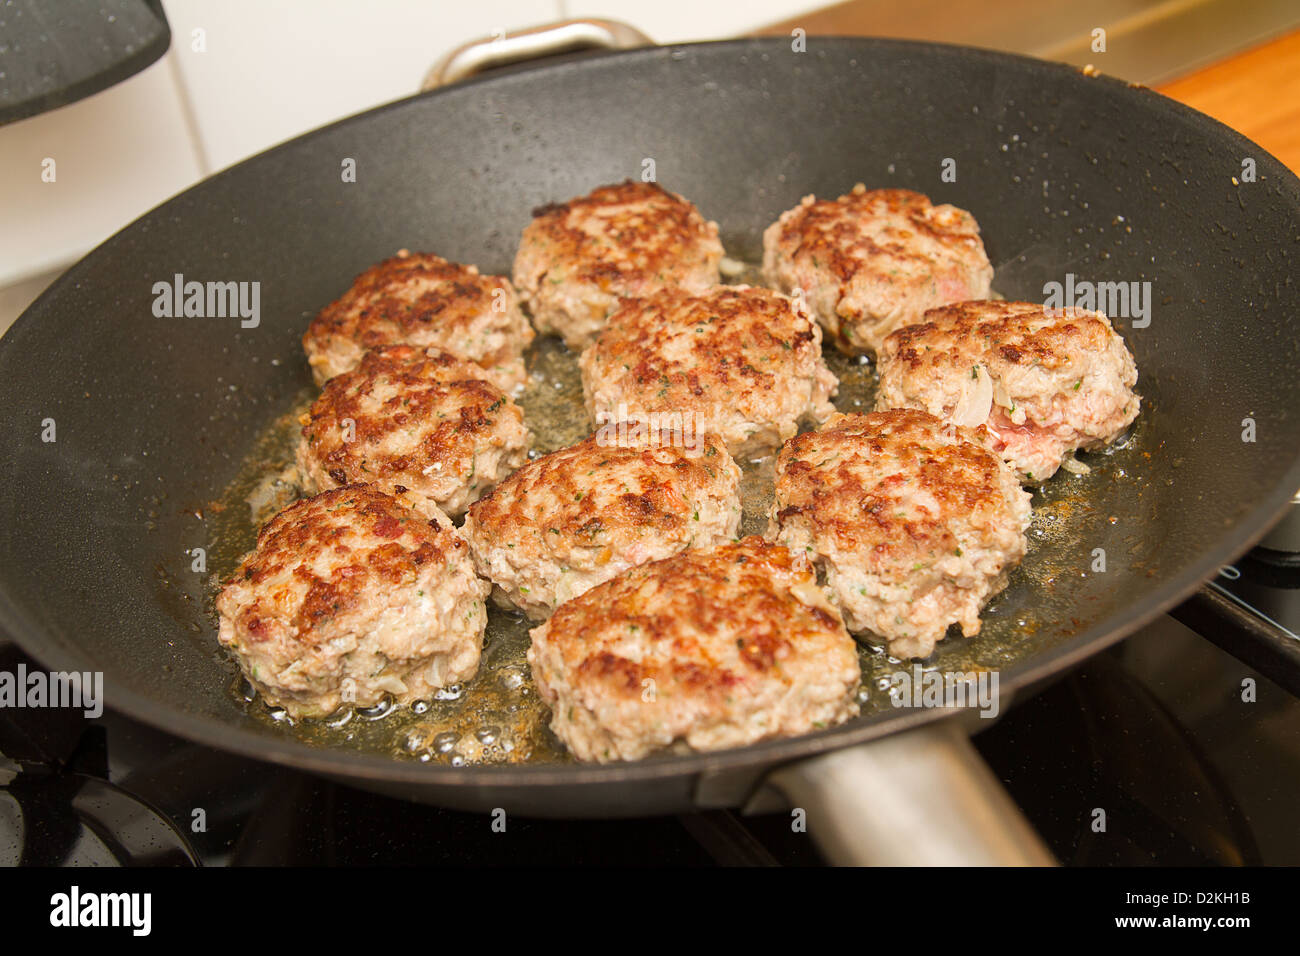 Meatballs in a pan Stock Photo